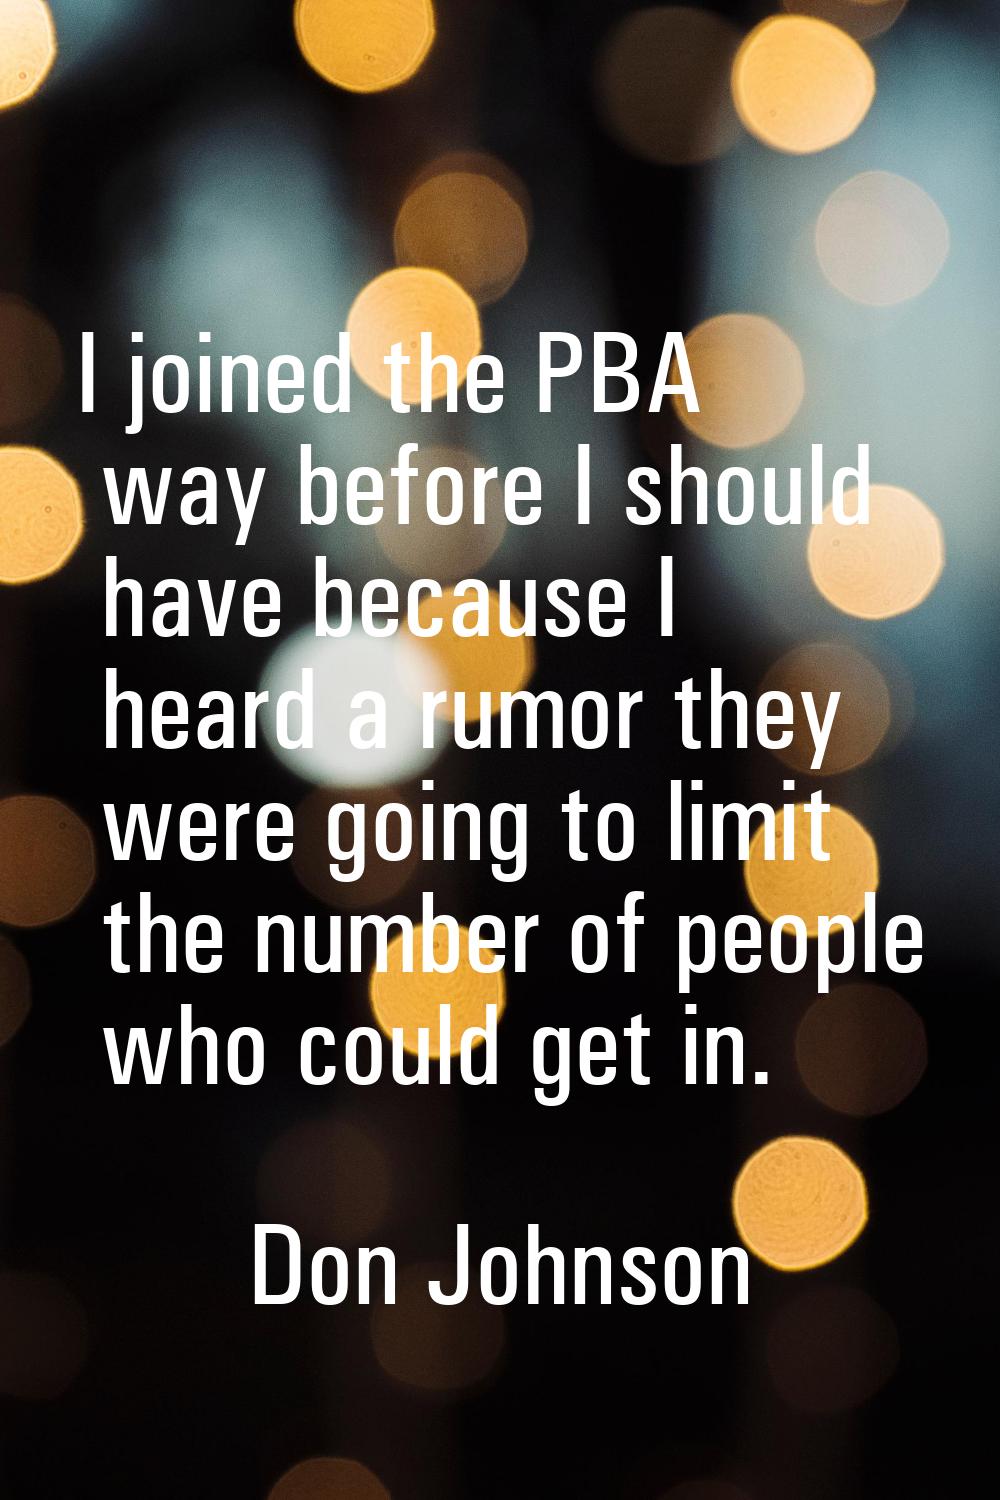 I joined the PBA way before I should have because I heard a rumor they were going to limit the numb